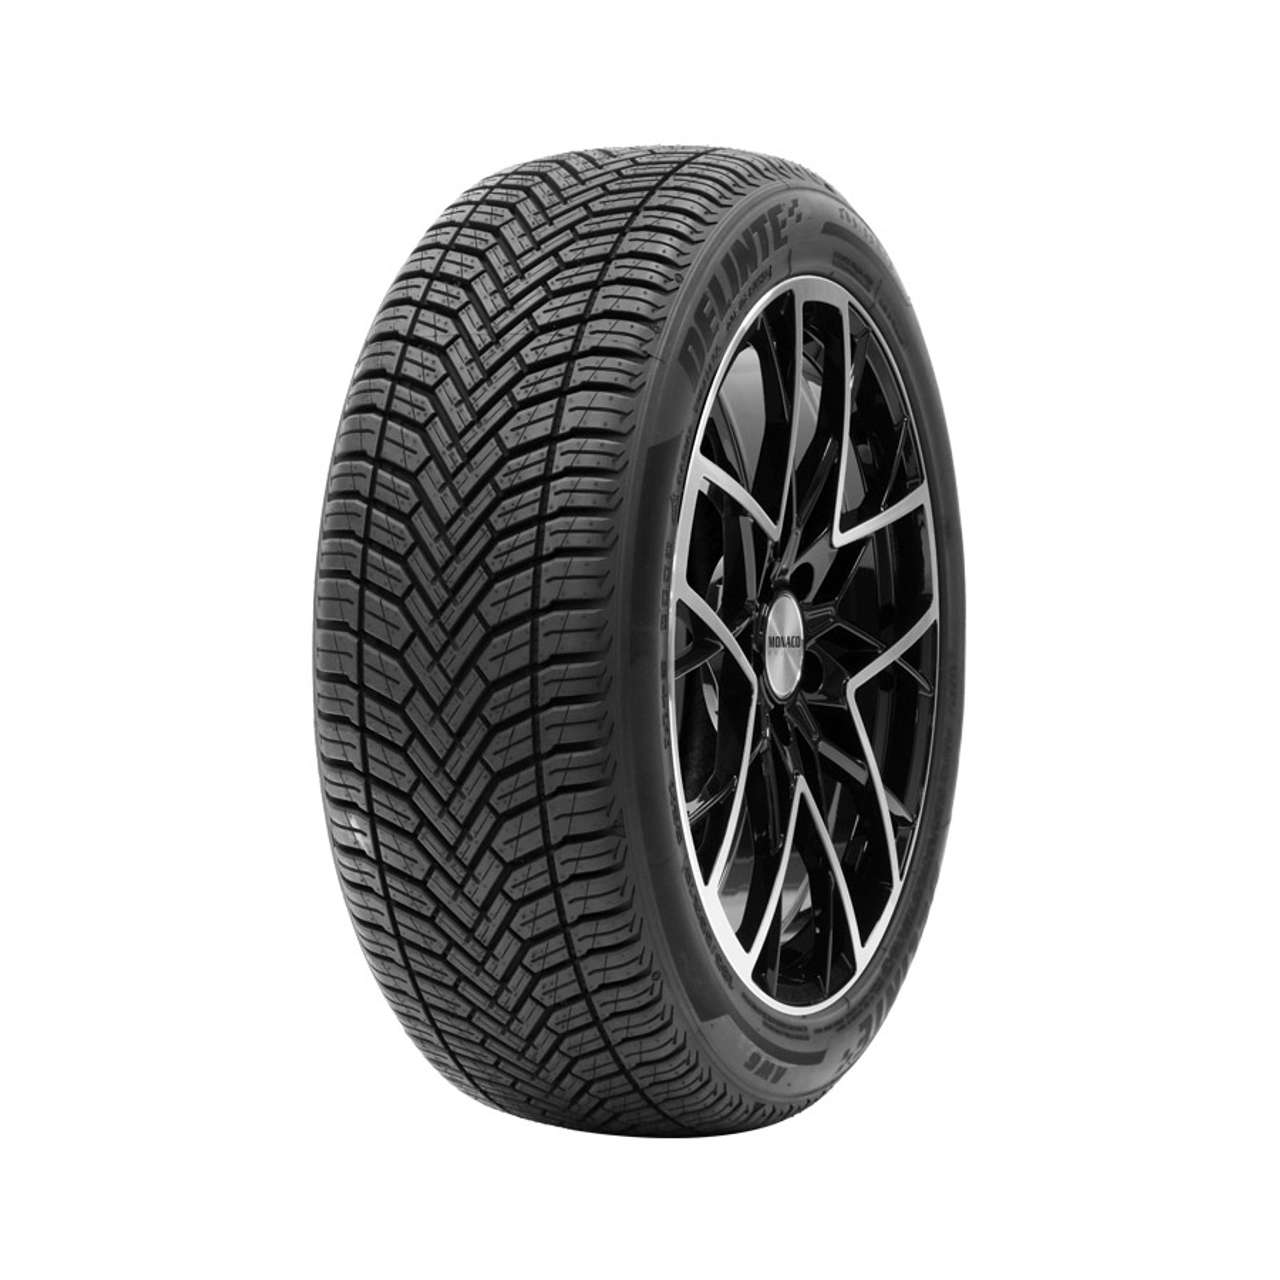 DELINTE AW6 205/60R16 96H BSW